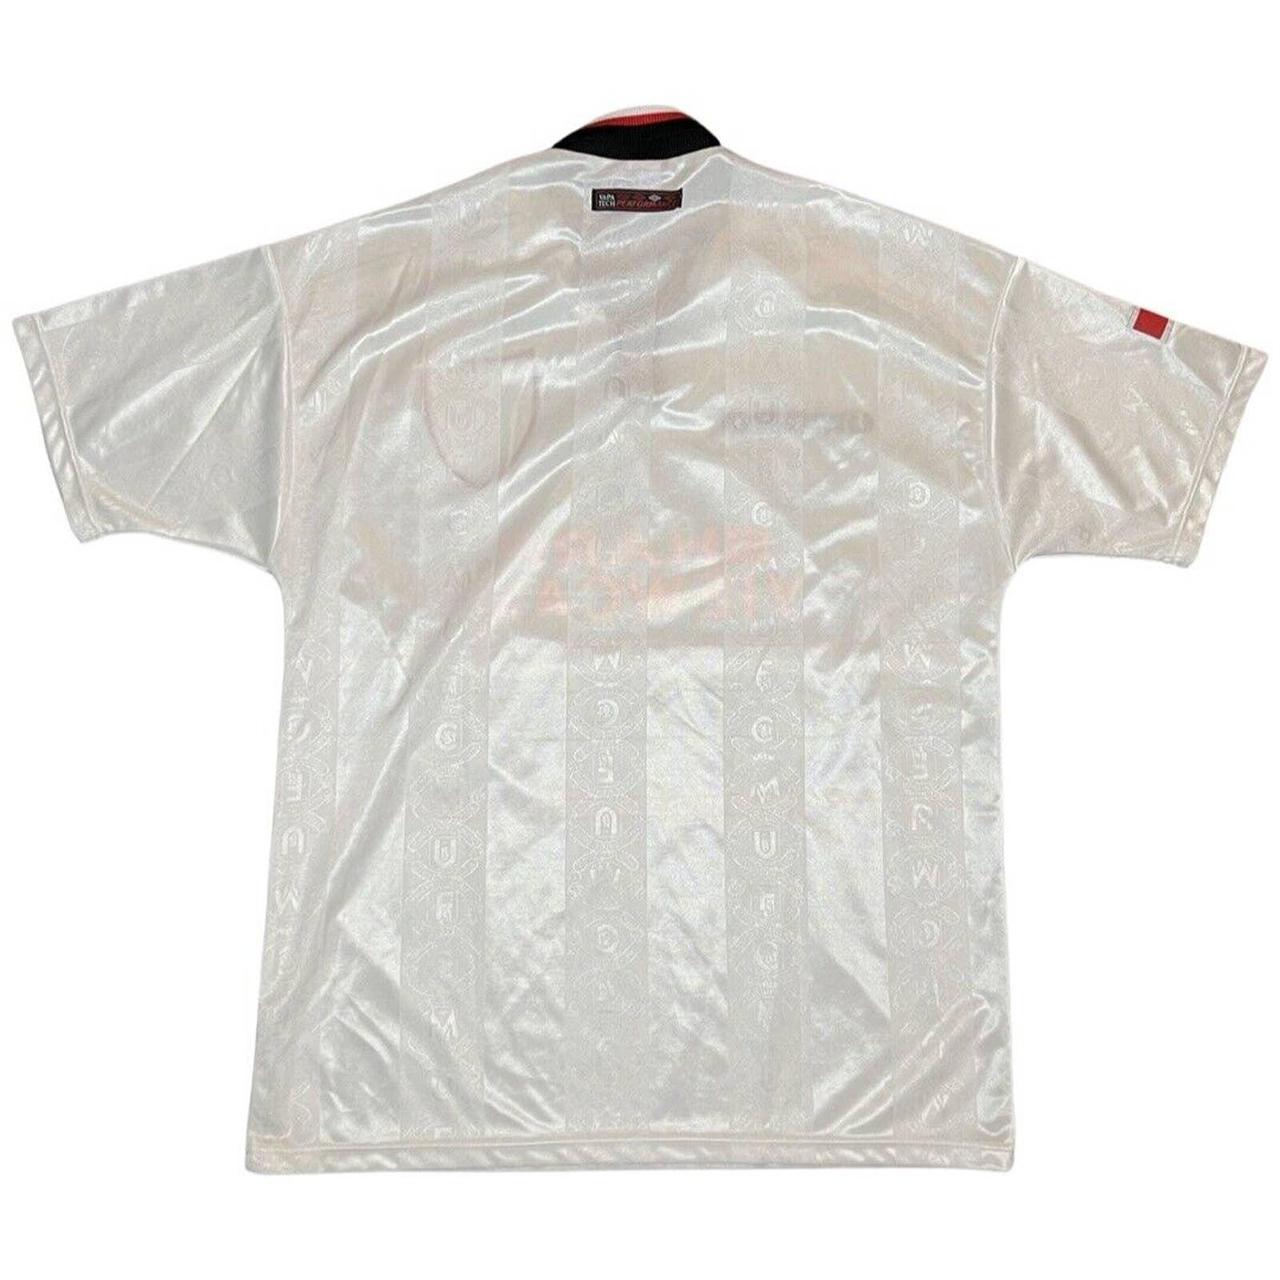 Product Image 2 - Rare Manchester United 1997-1999 Away